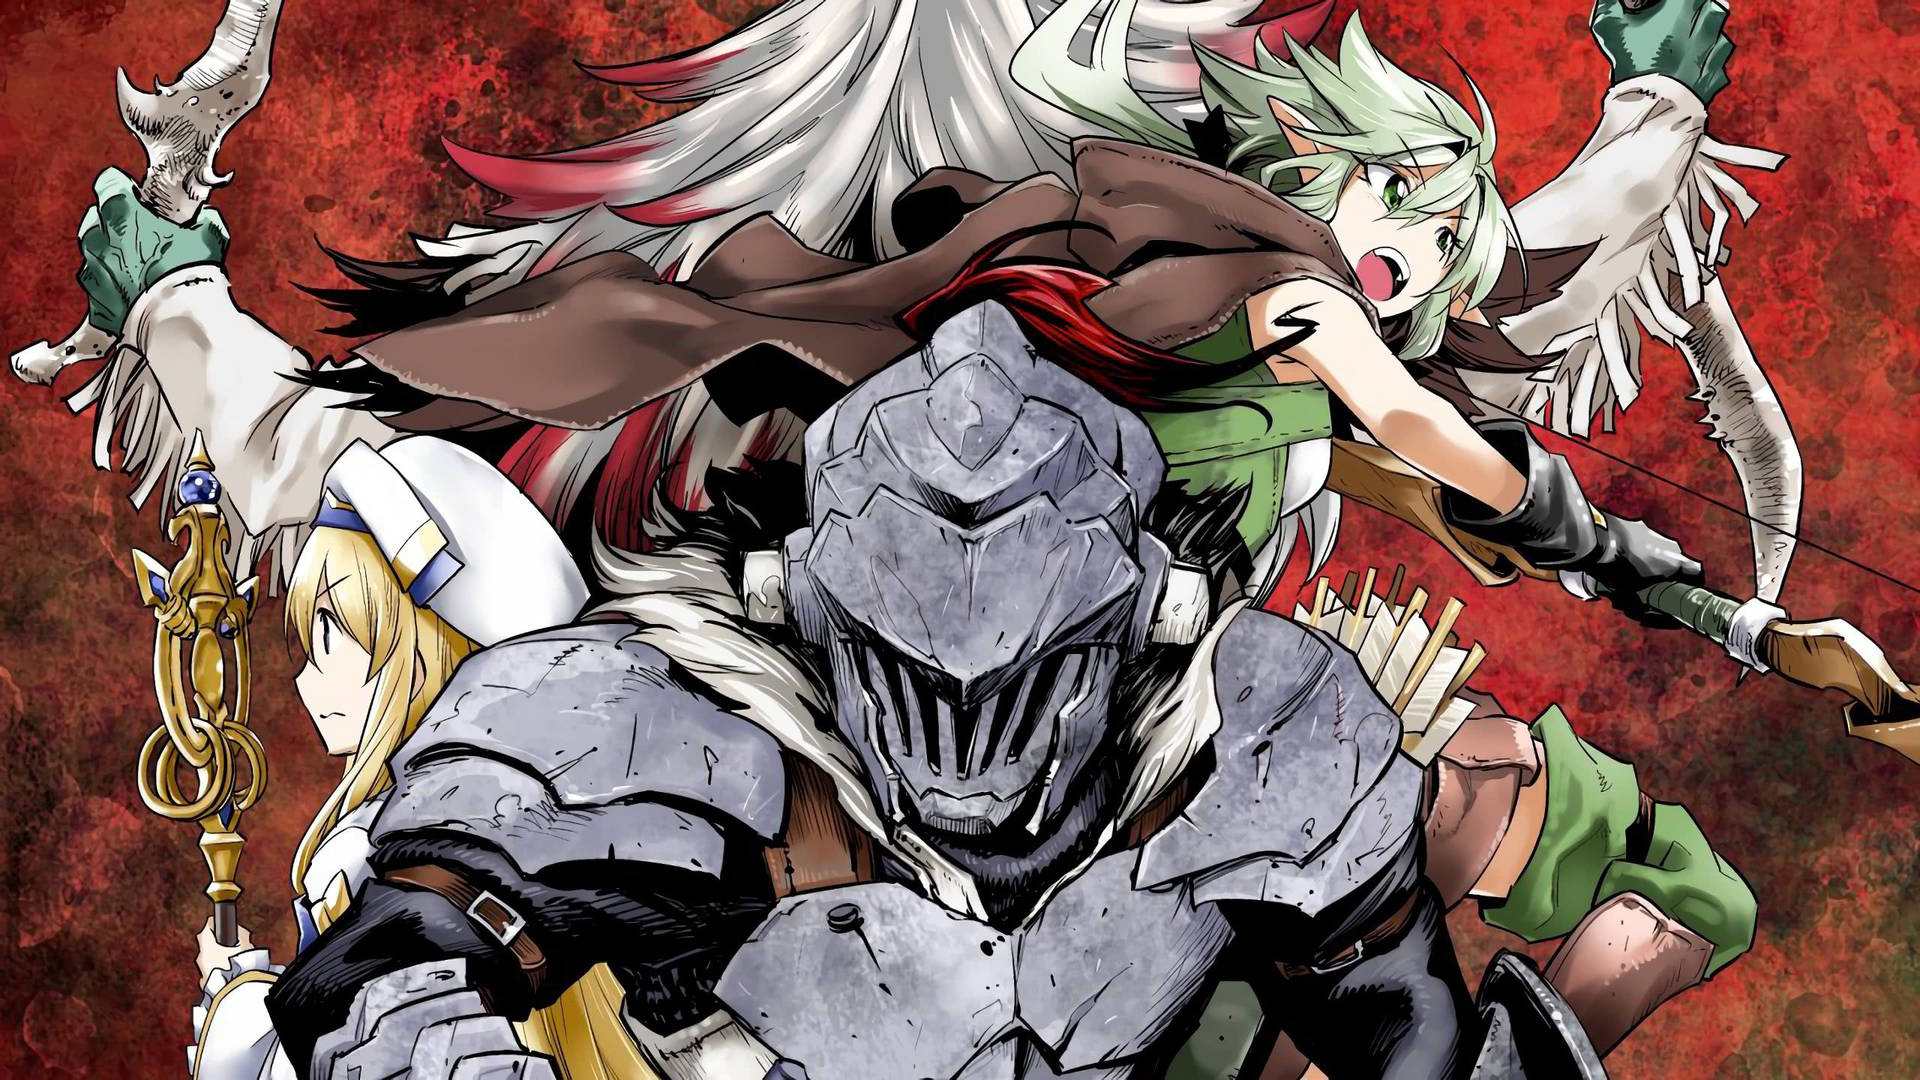 Goblin Slayer And High Elf Archer Team Up To Take On The Monsters! Background